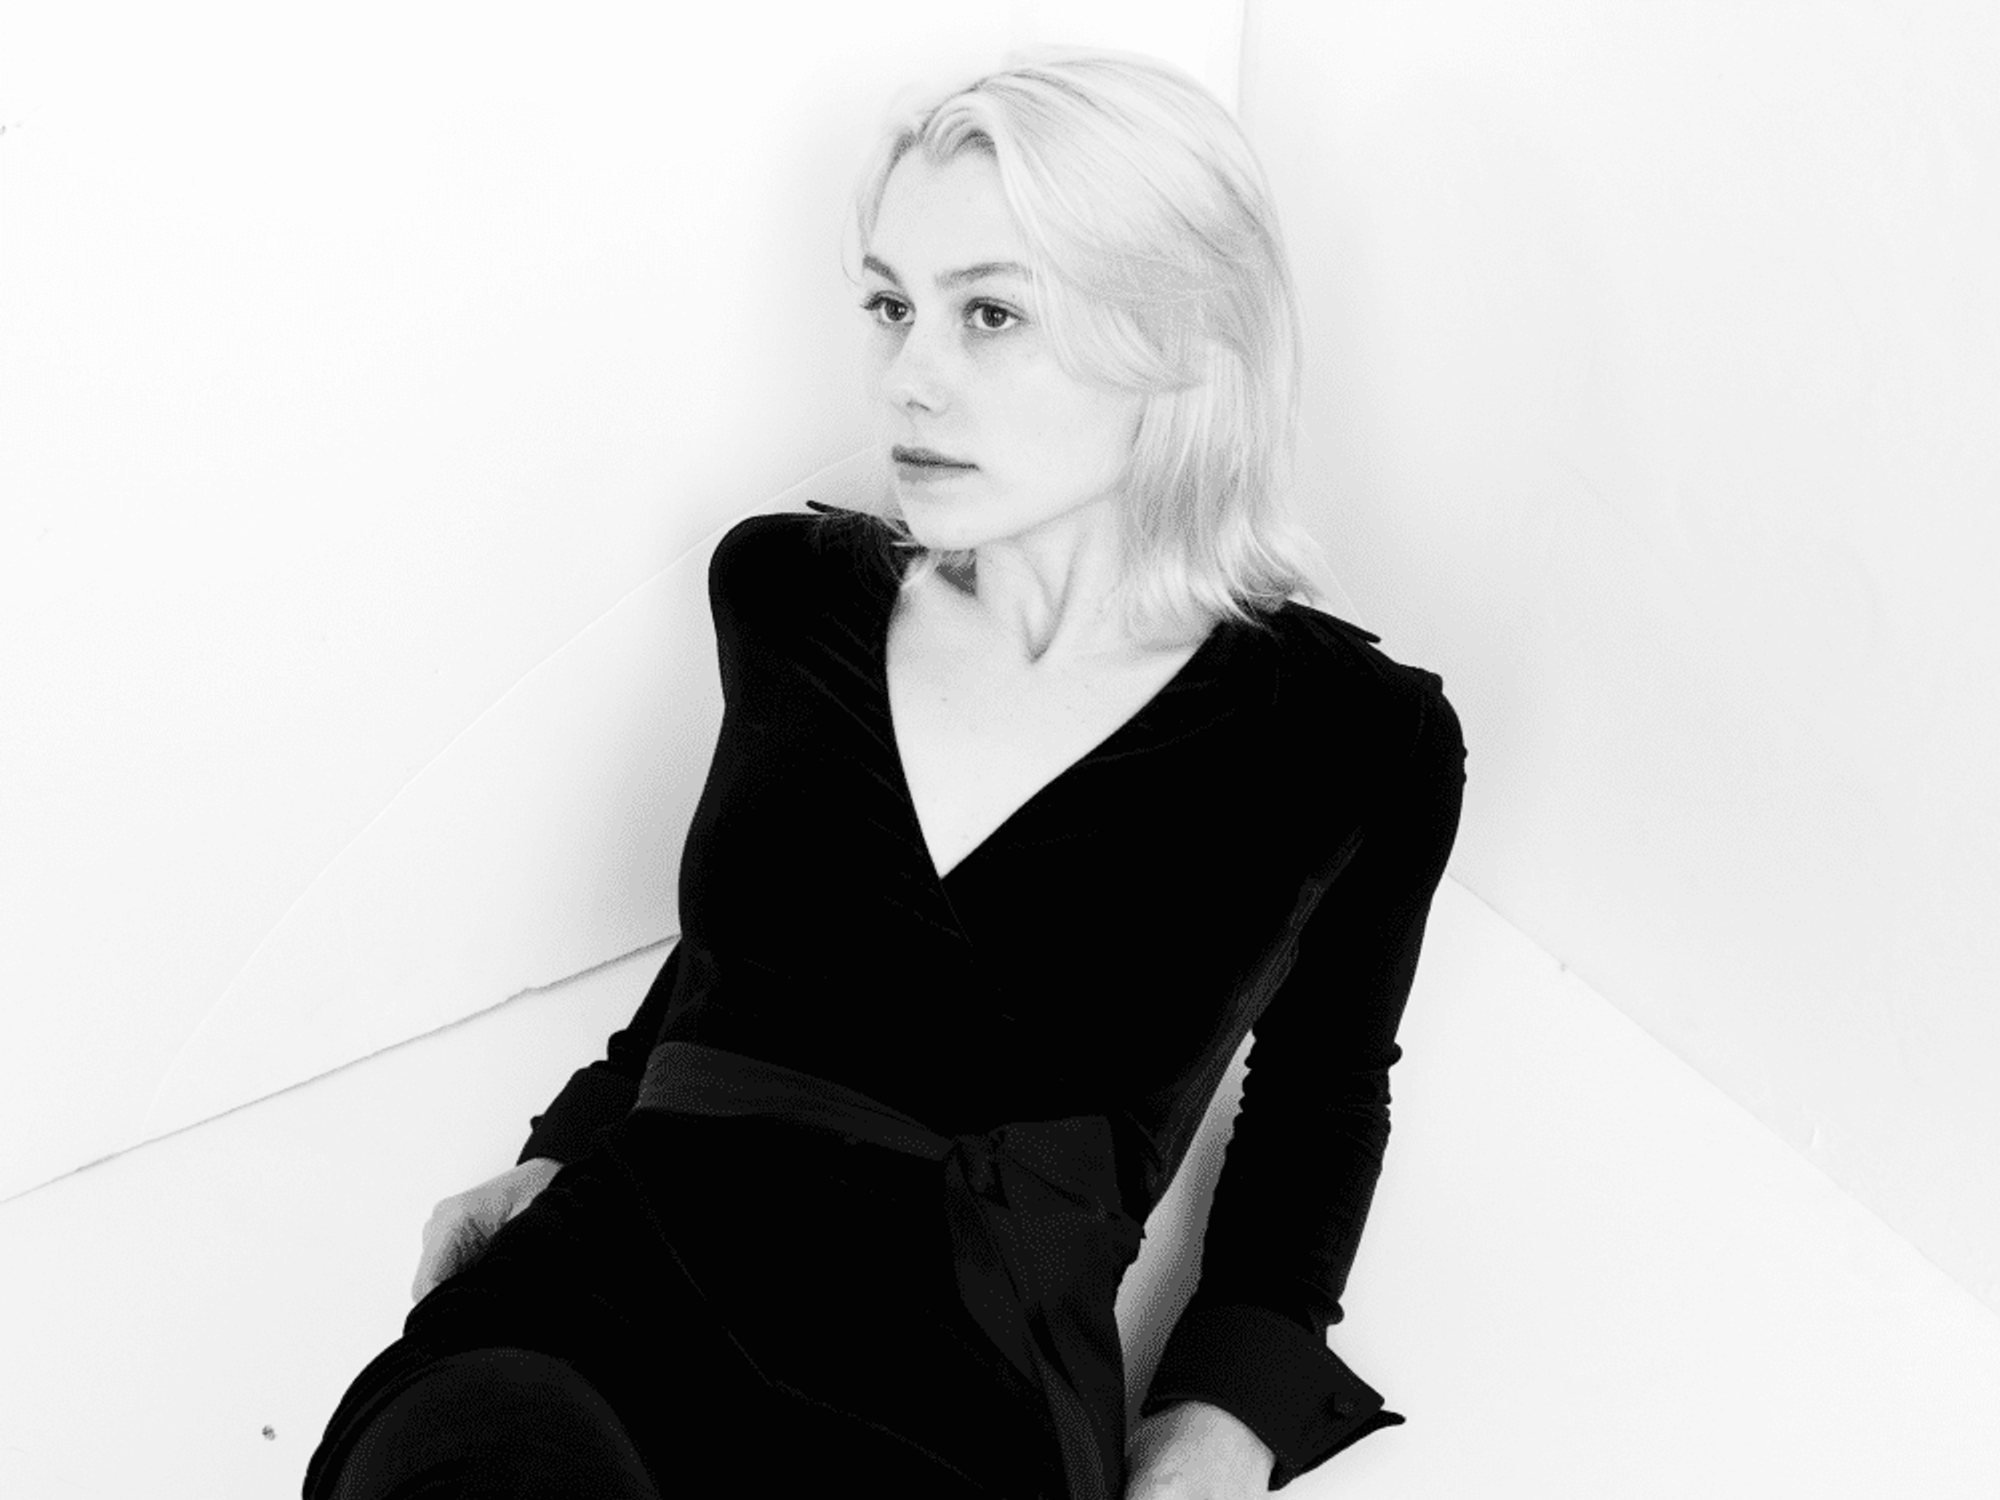 Acclaimed singer-songwriter Phoebe Bridgers performs a headline set at White Oak Music Hall Friday, February 9.